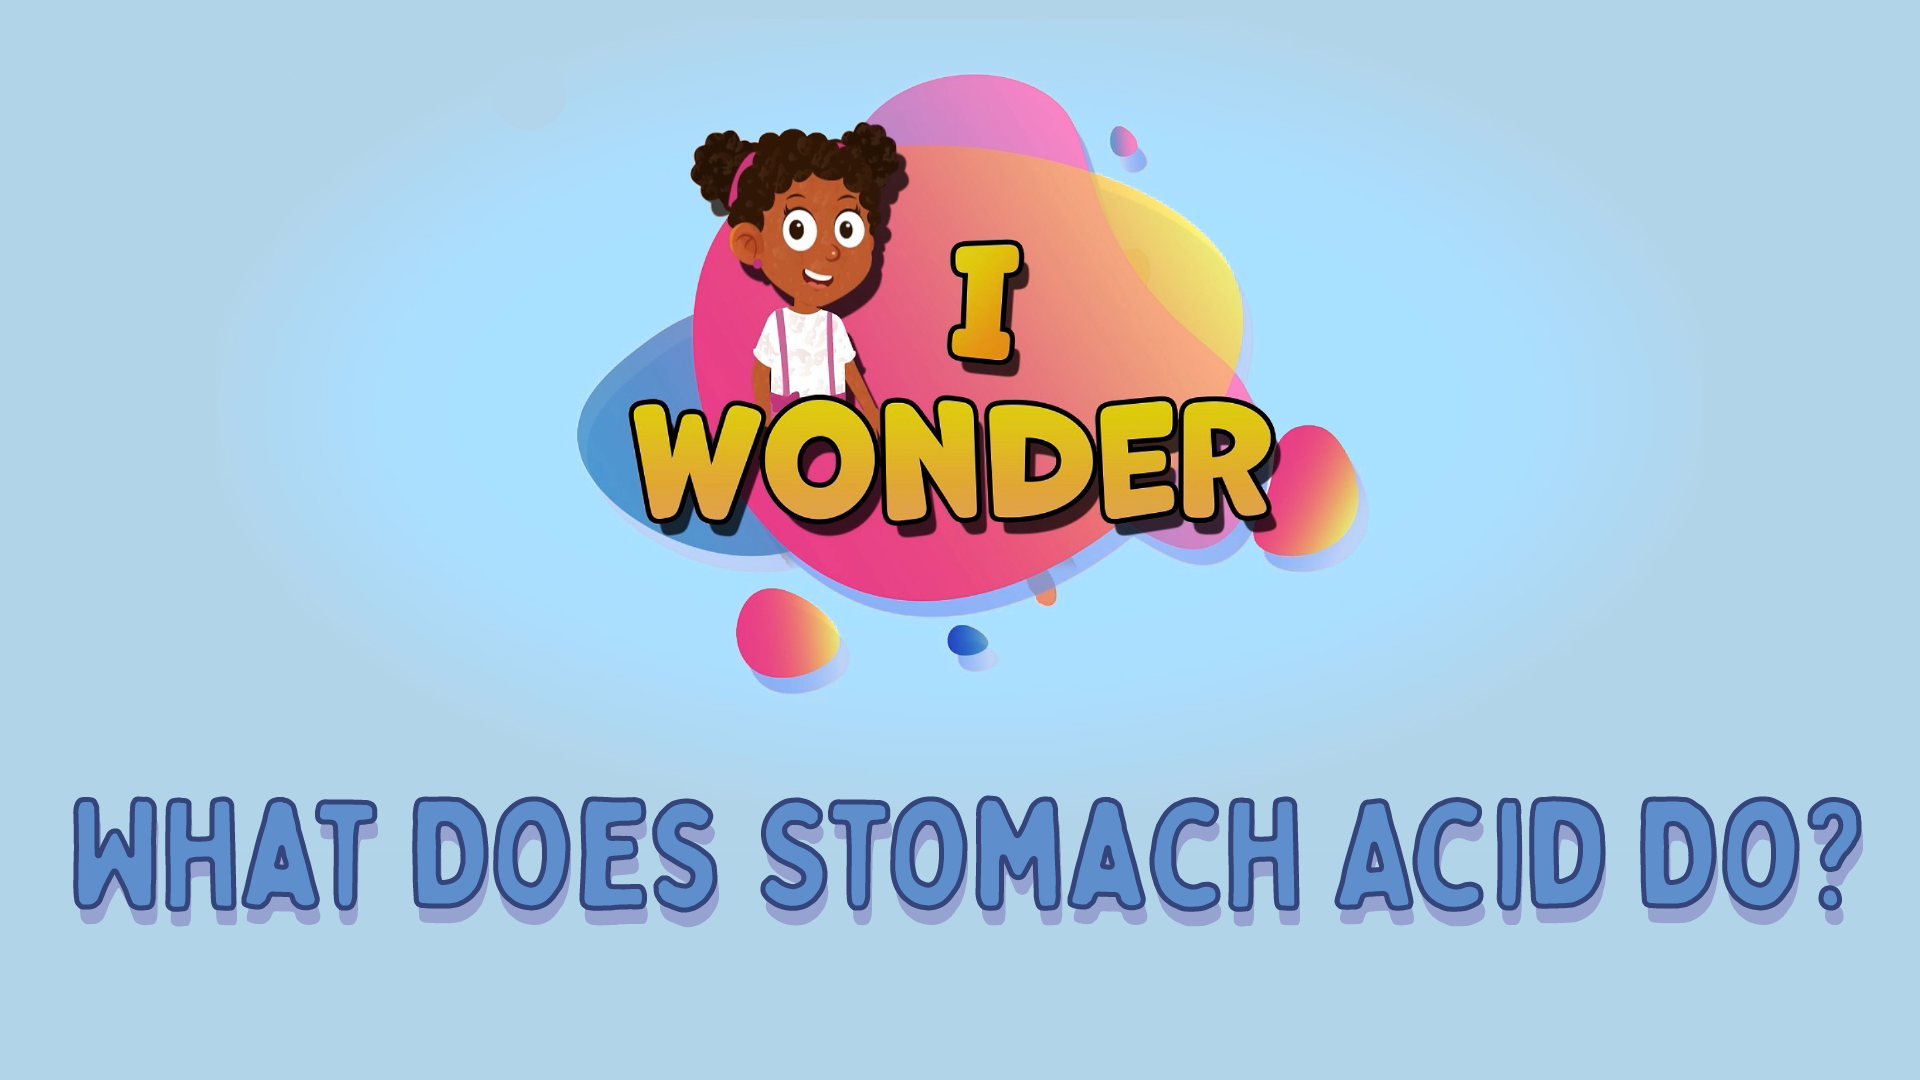 What Does Stomach Acid Do?